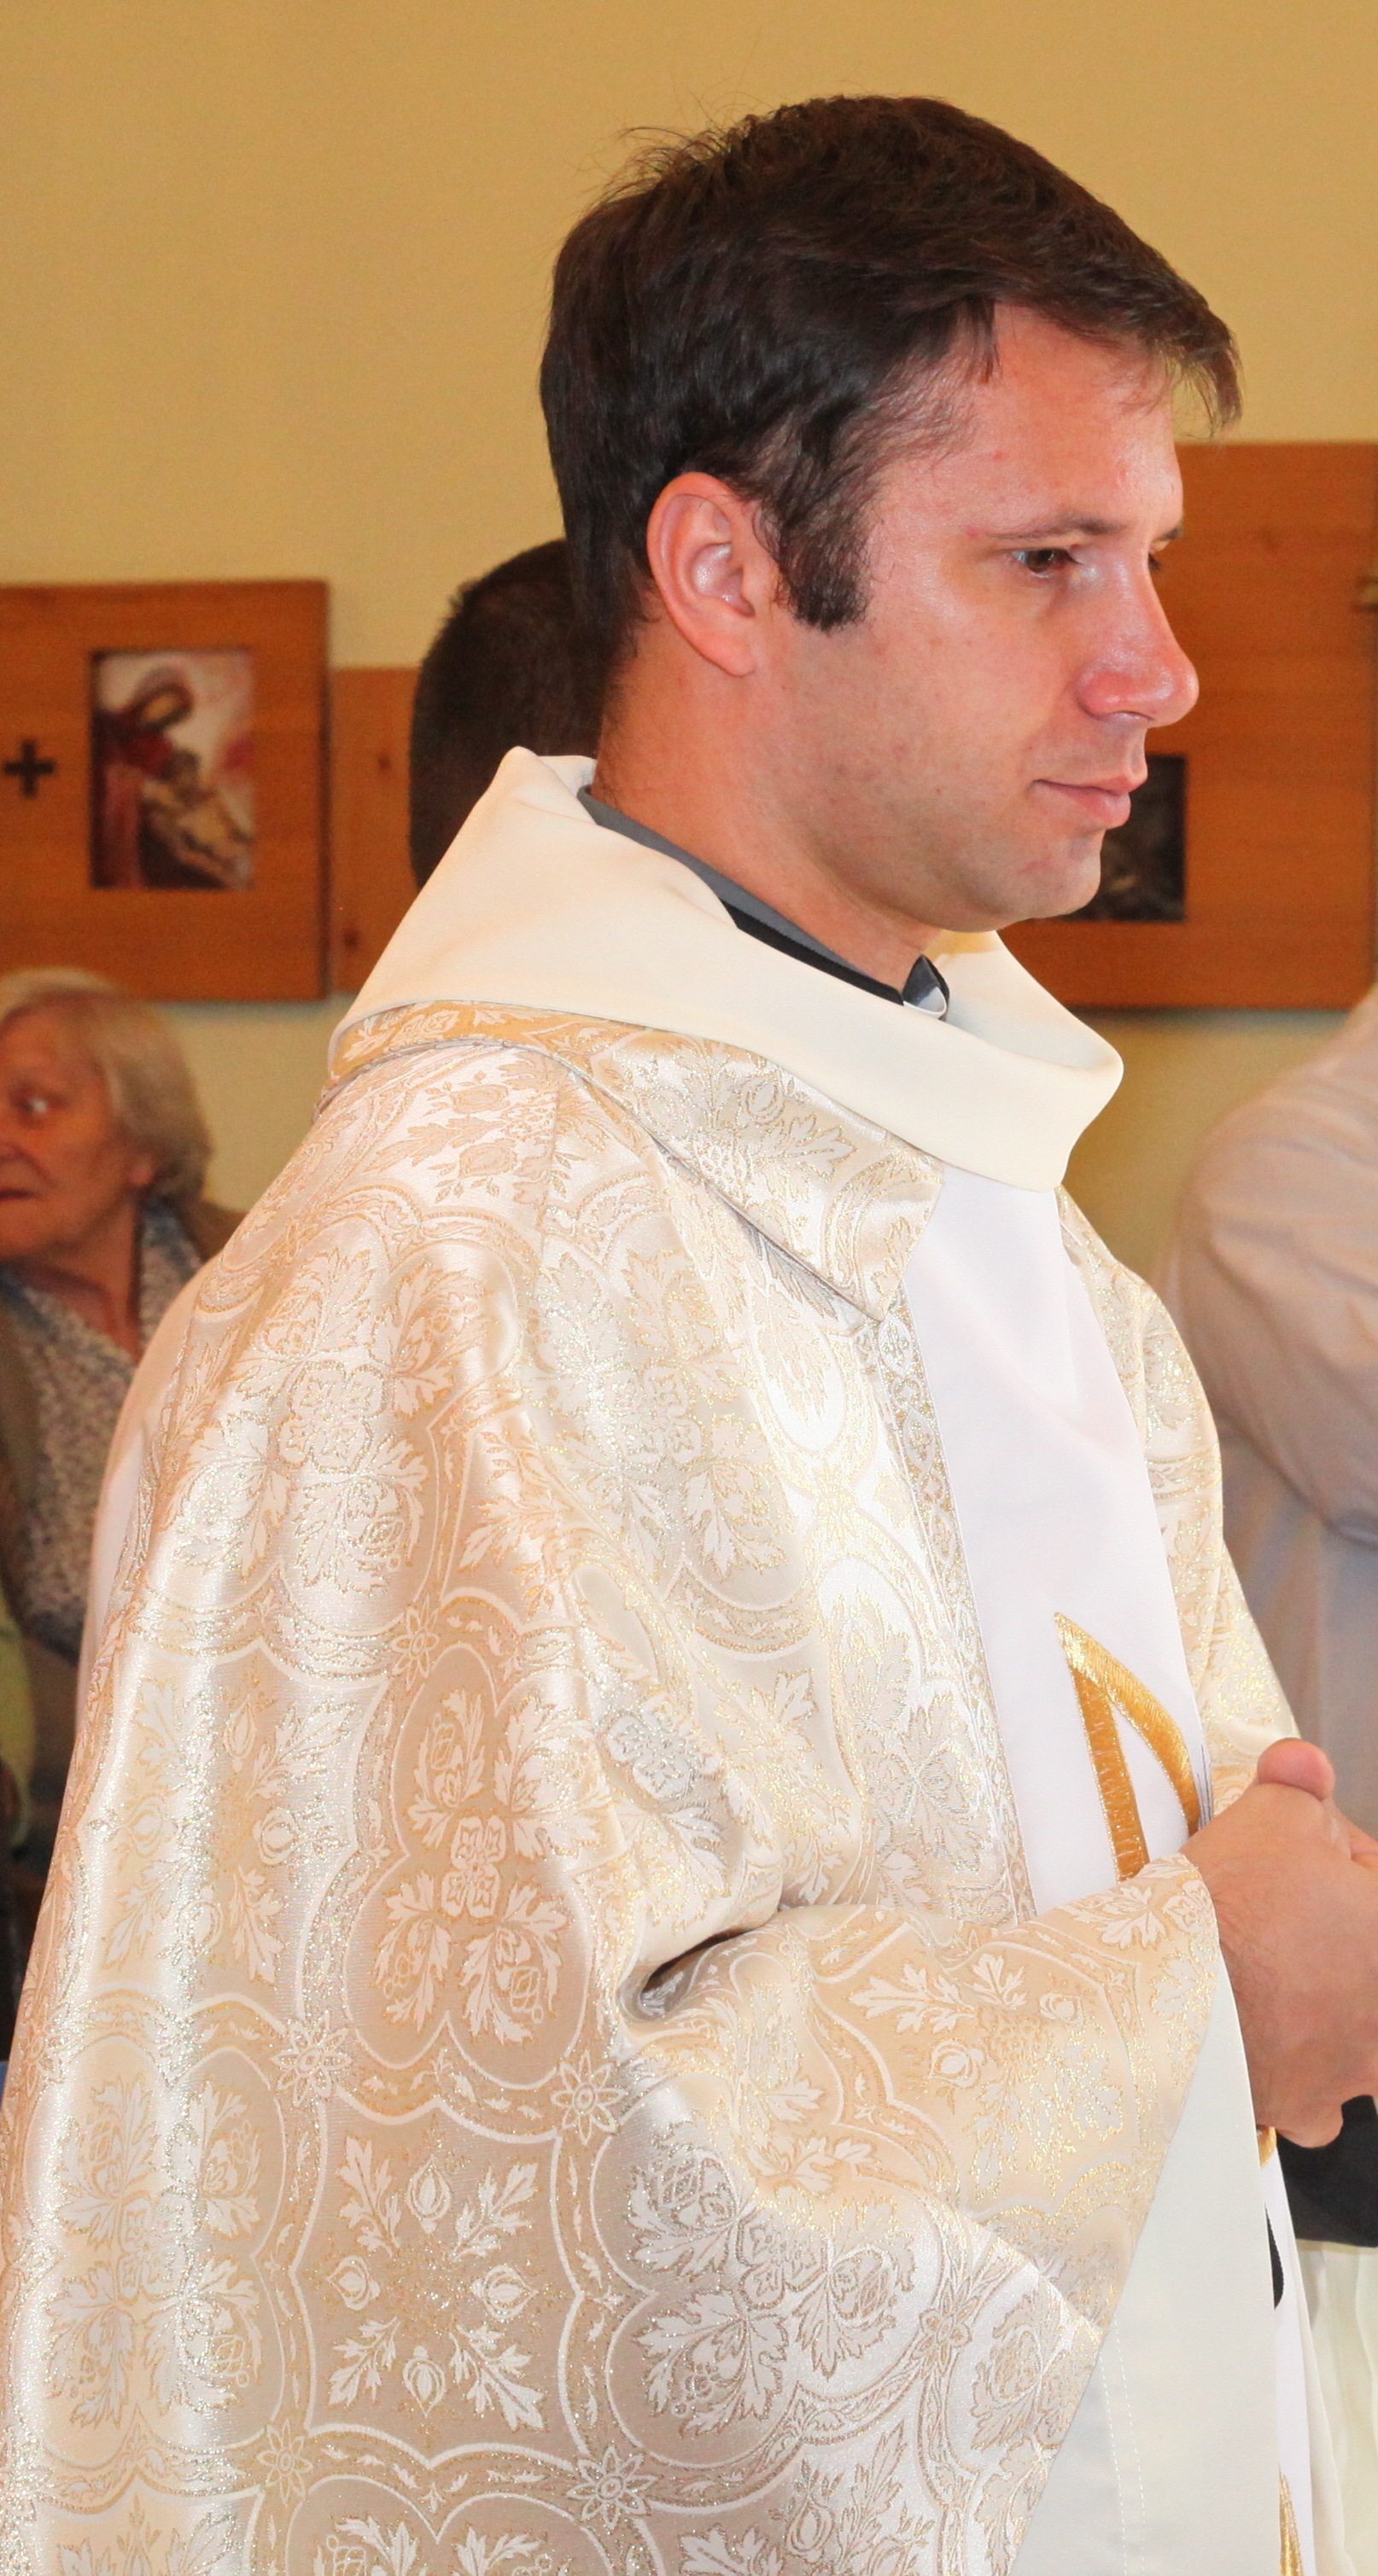 a young Catholic priest in a Church, photo 2